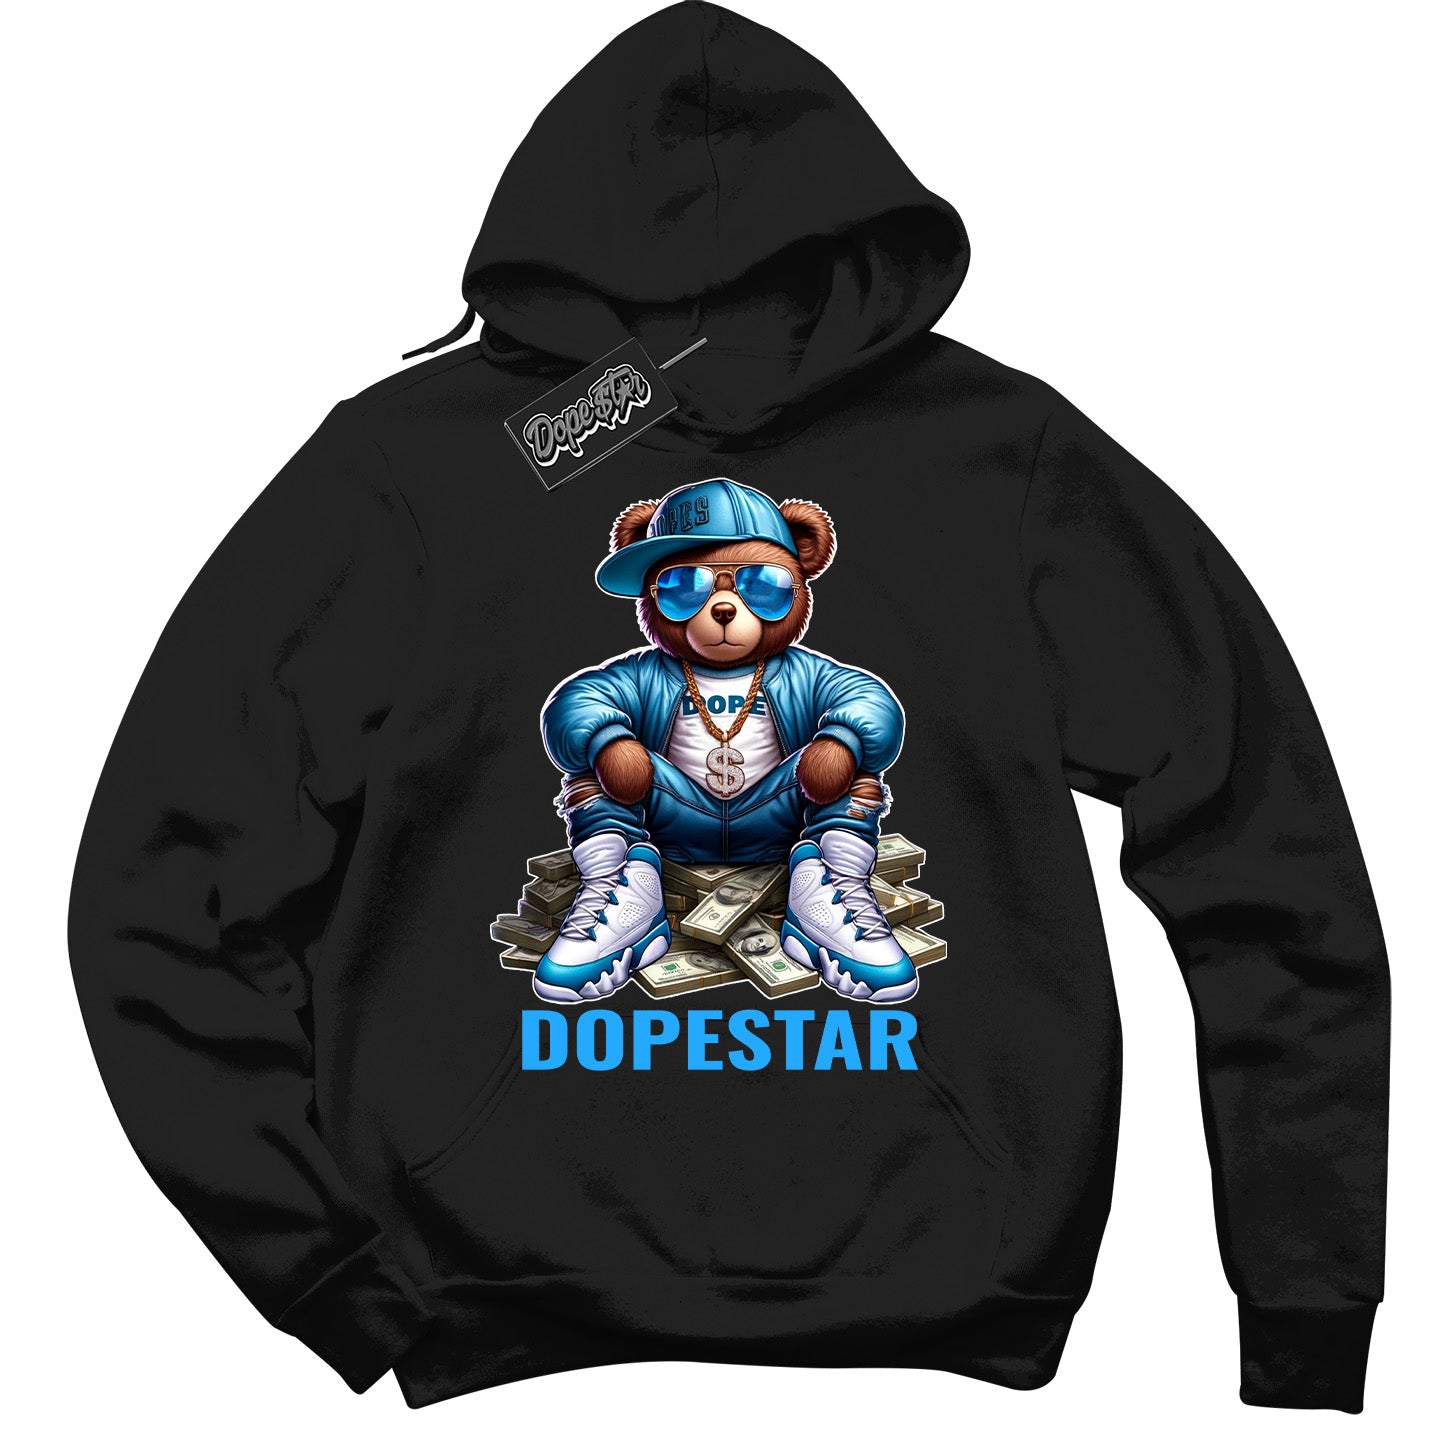 Cool Black Graphic DopeStar Hoodie with “  Dope Bear  “ print, that perfectly matches Powder Blue 9s sneakers